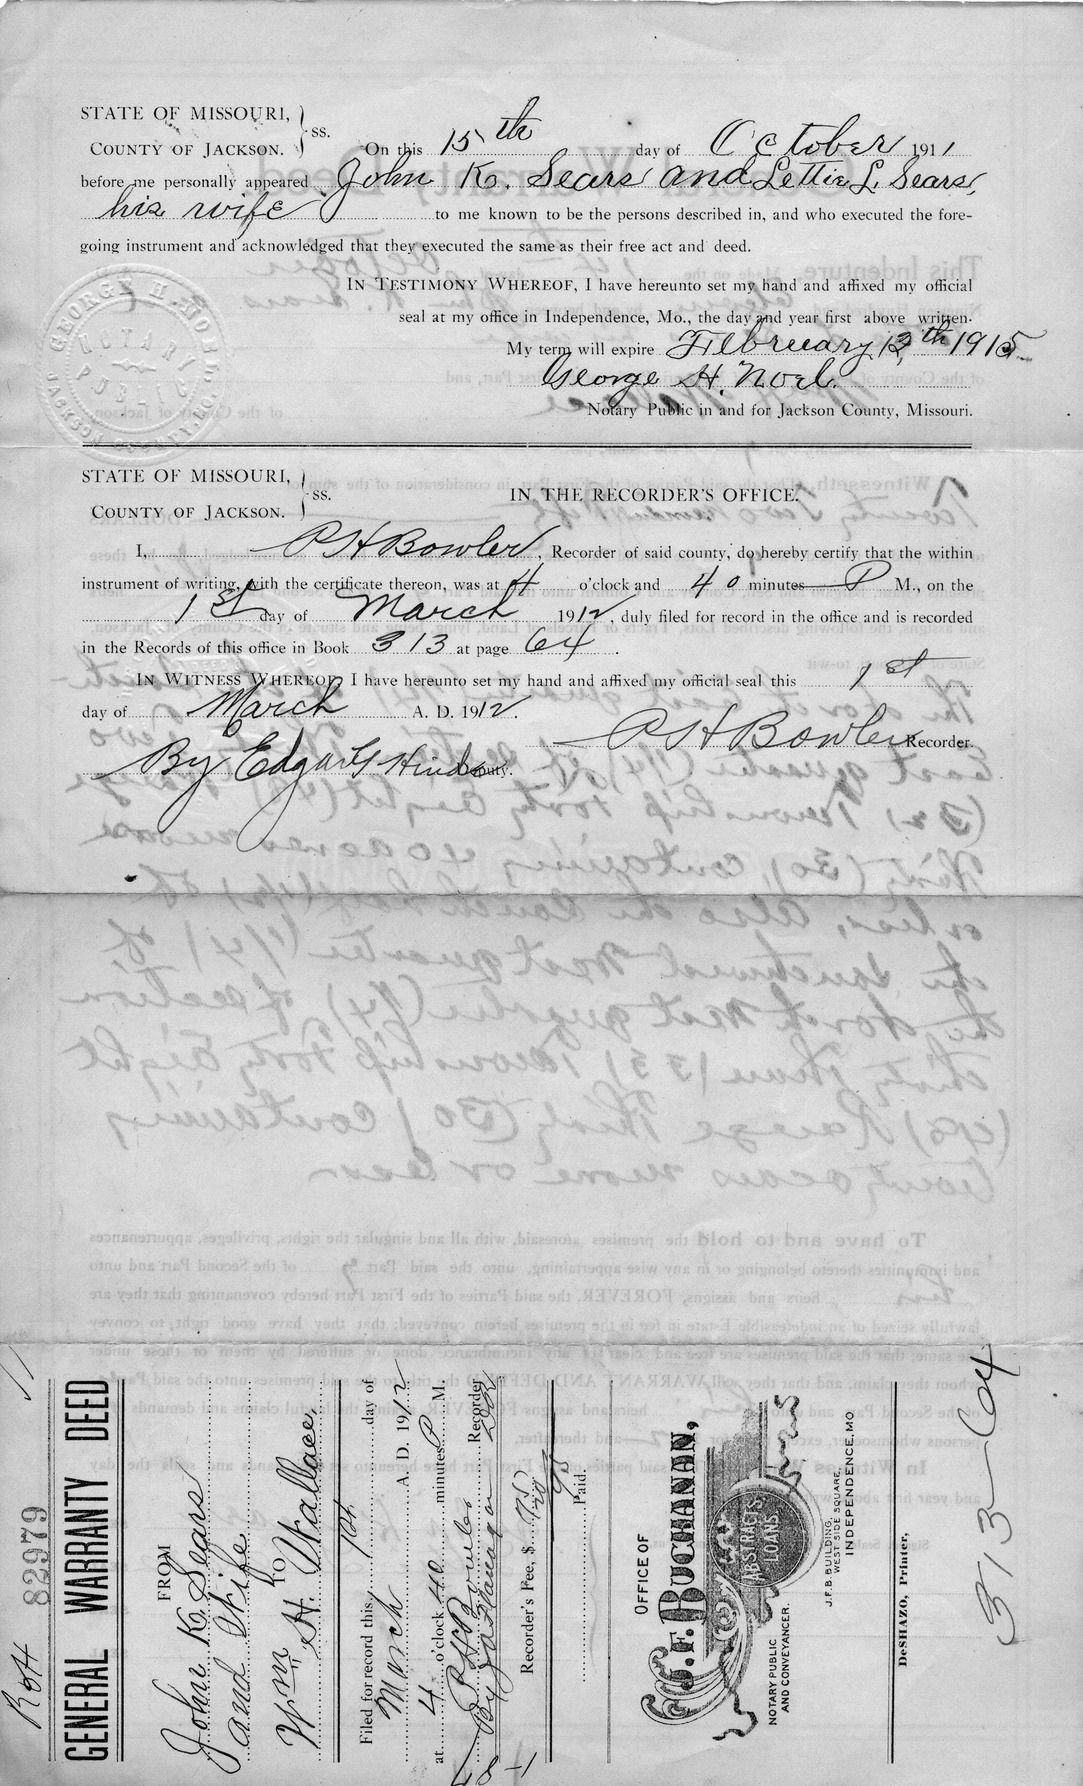 General Warranty Deed from John K. Sears and Lettie L. Sears to William H. Wallace